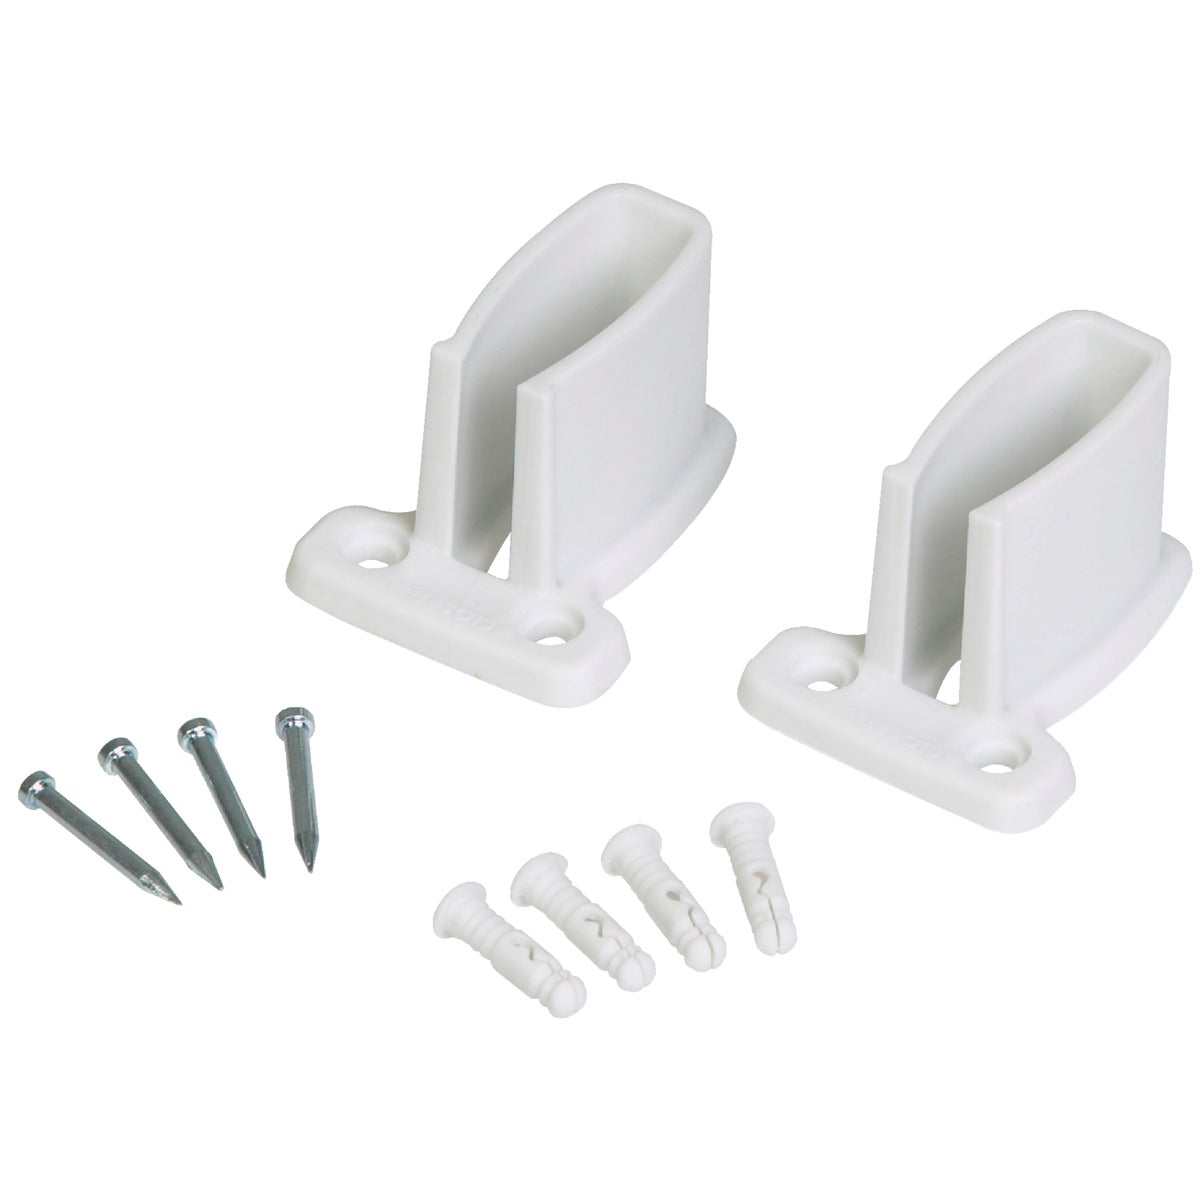 Item 239156, TotalSlide wall brackets with pins. Use with TotalSlide shelving only.